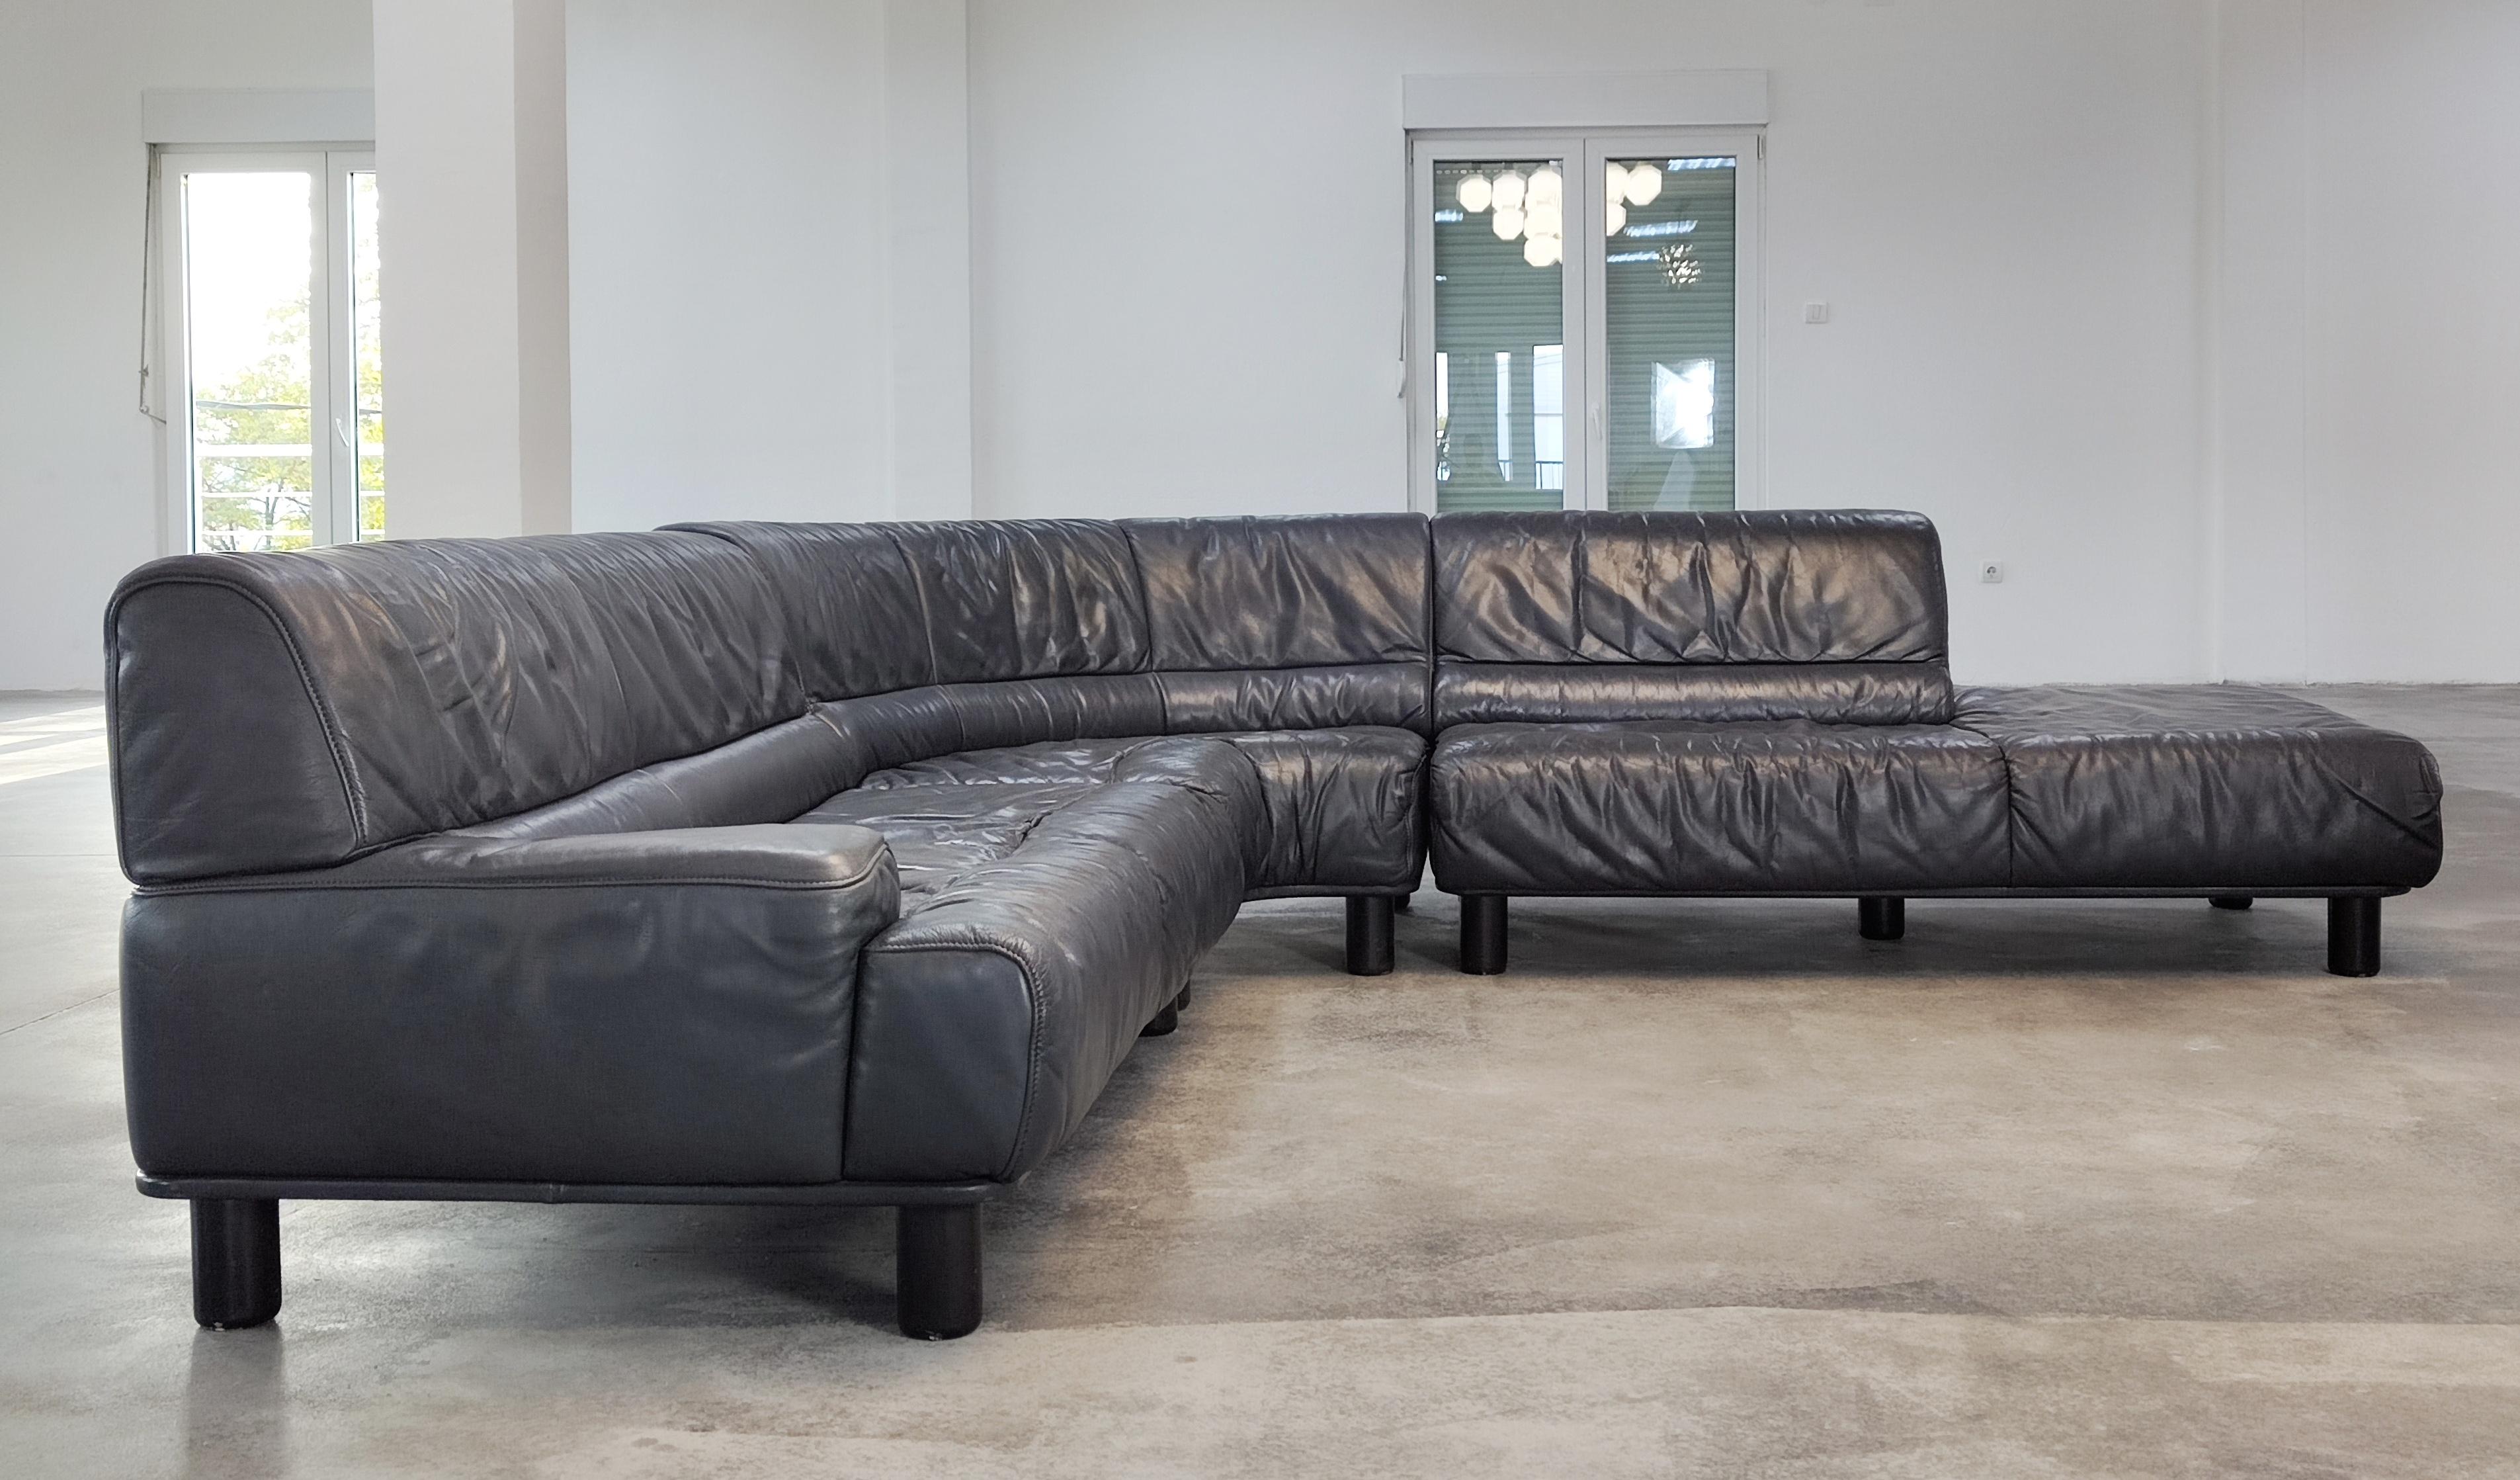 Swiss Sectional Anthracite Gray Leather Sofa DS-18 by De Sede, Switzerland 1980s For Sale